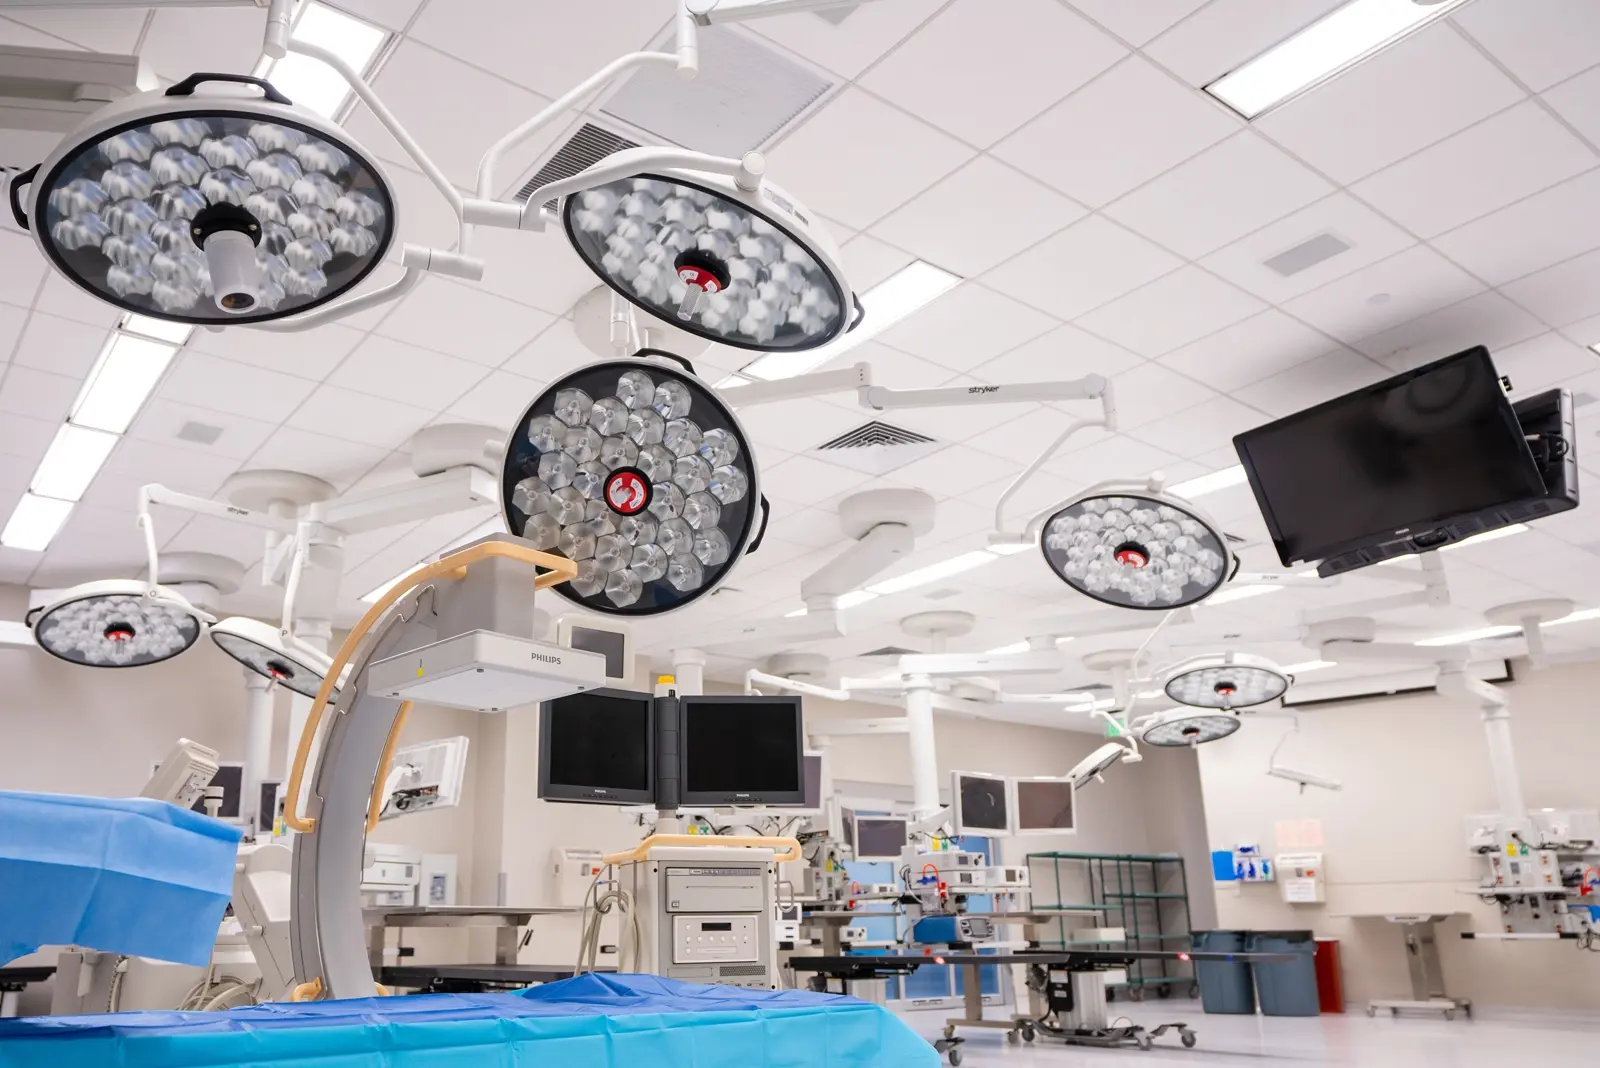 CAMLS A modern operating room equipped with several large round surgical lights on the ceiling, multiple medical monitors, and various surgical equipment. The room is well-lit with clean, sterile surfaces, and a blue draped surgical area is visible in the foreground.